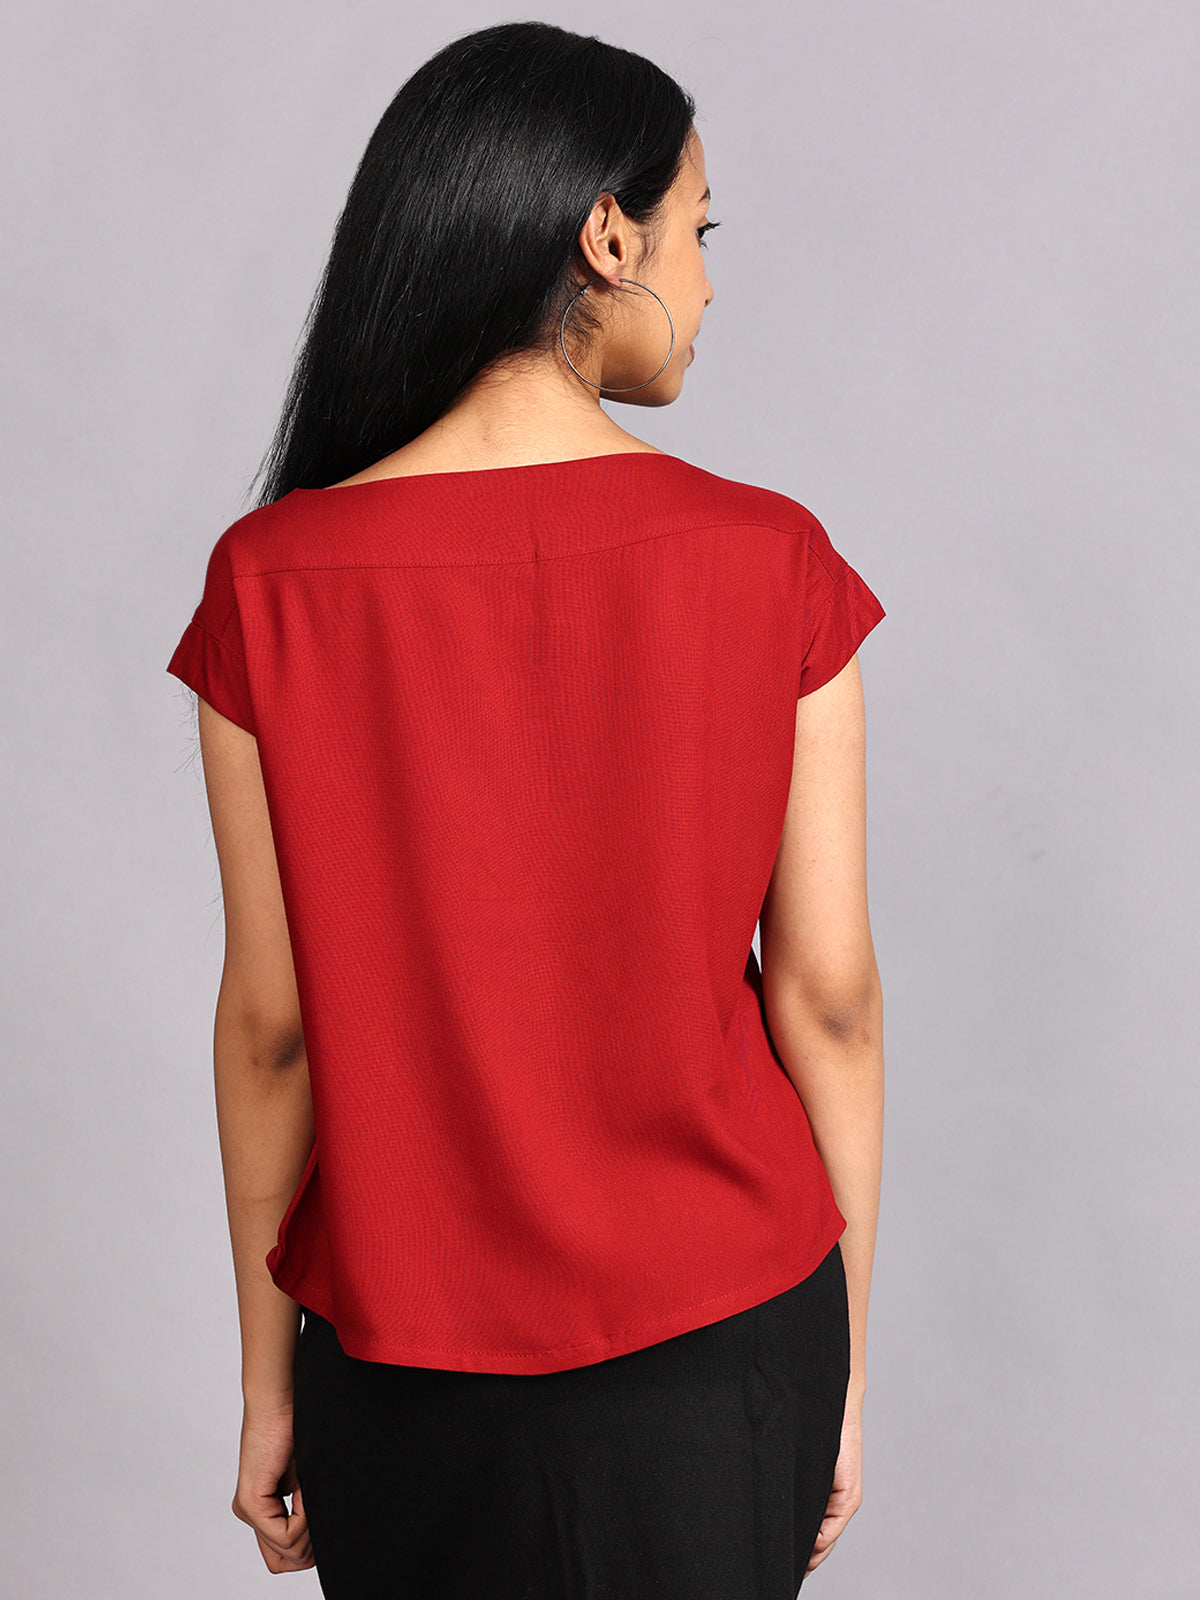 Shop Boat Neck Red Woven Top Online Now